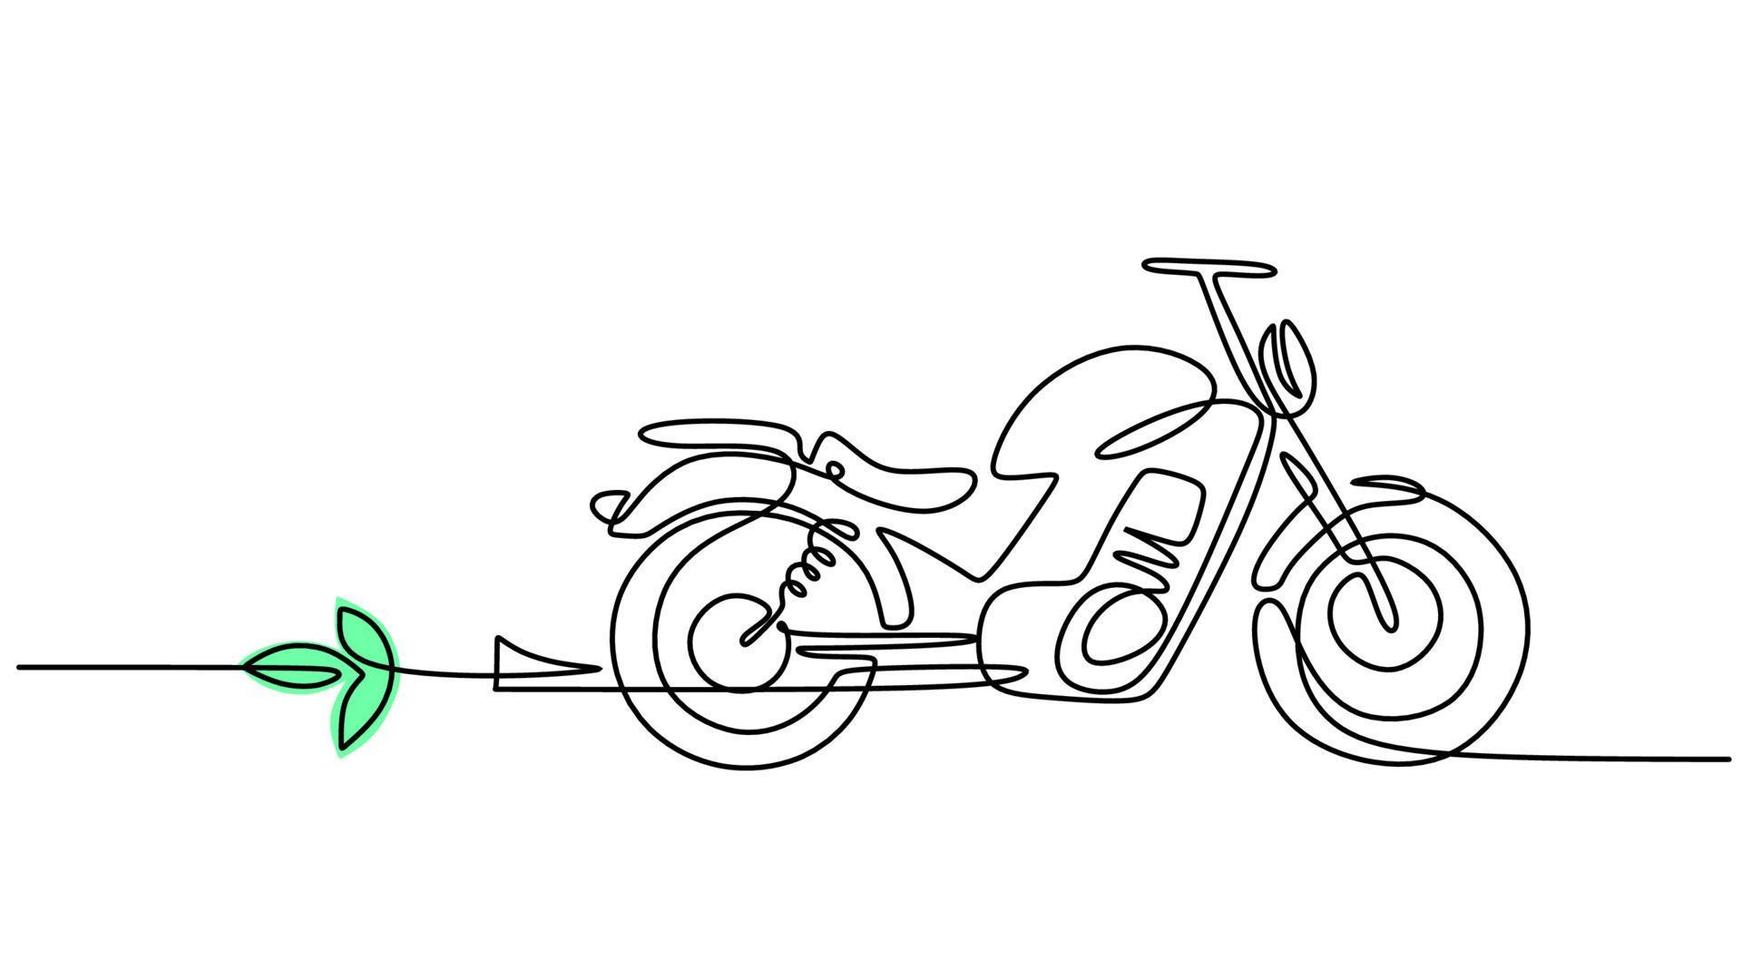 One line drawing of electric motorcycle isolated on white background. Continuous single line minimalism. vector